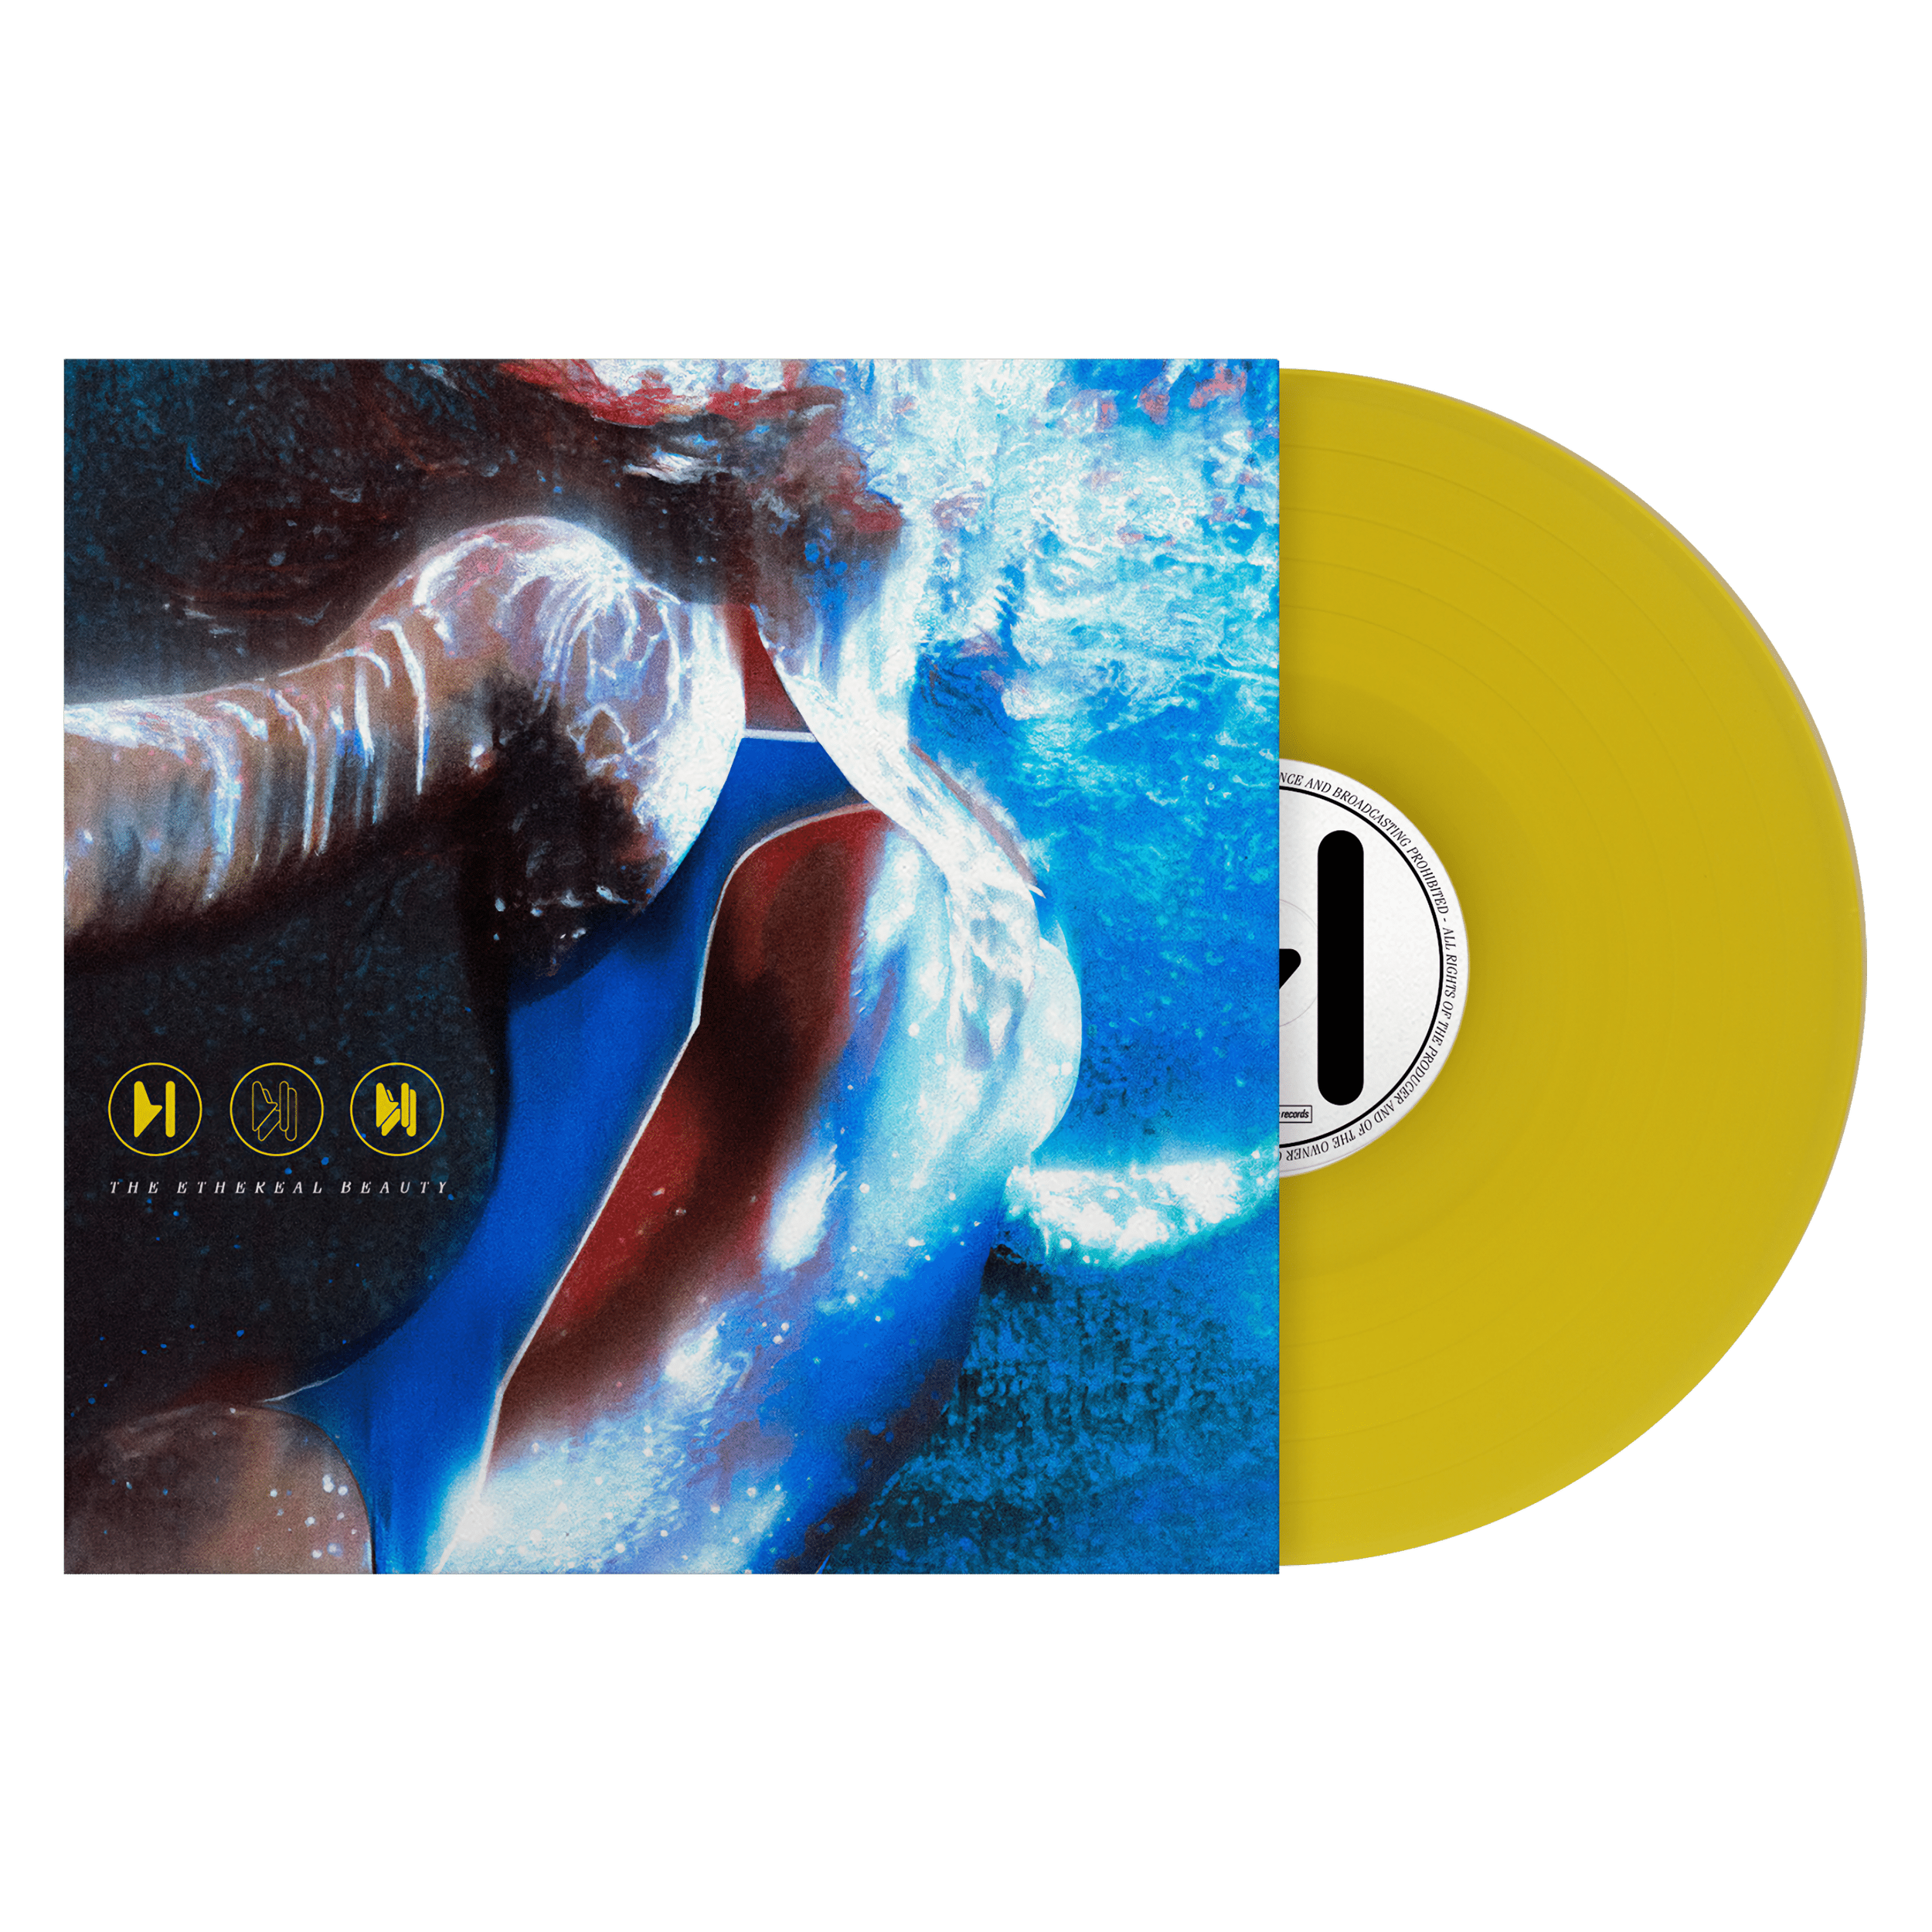 Holydanger - The Ethereal Beauty - Vinyl - Transparent Yellow.png